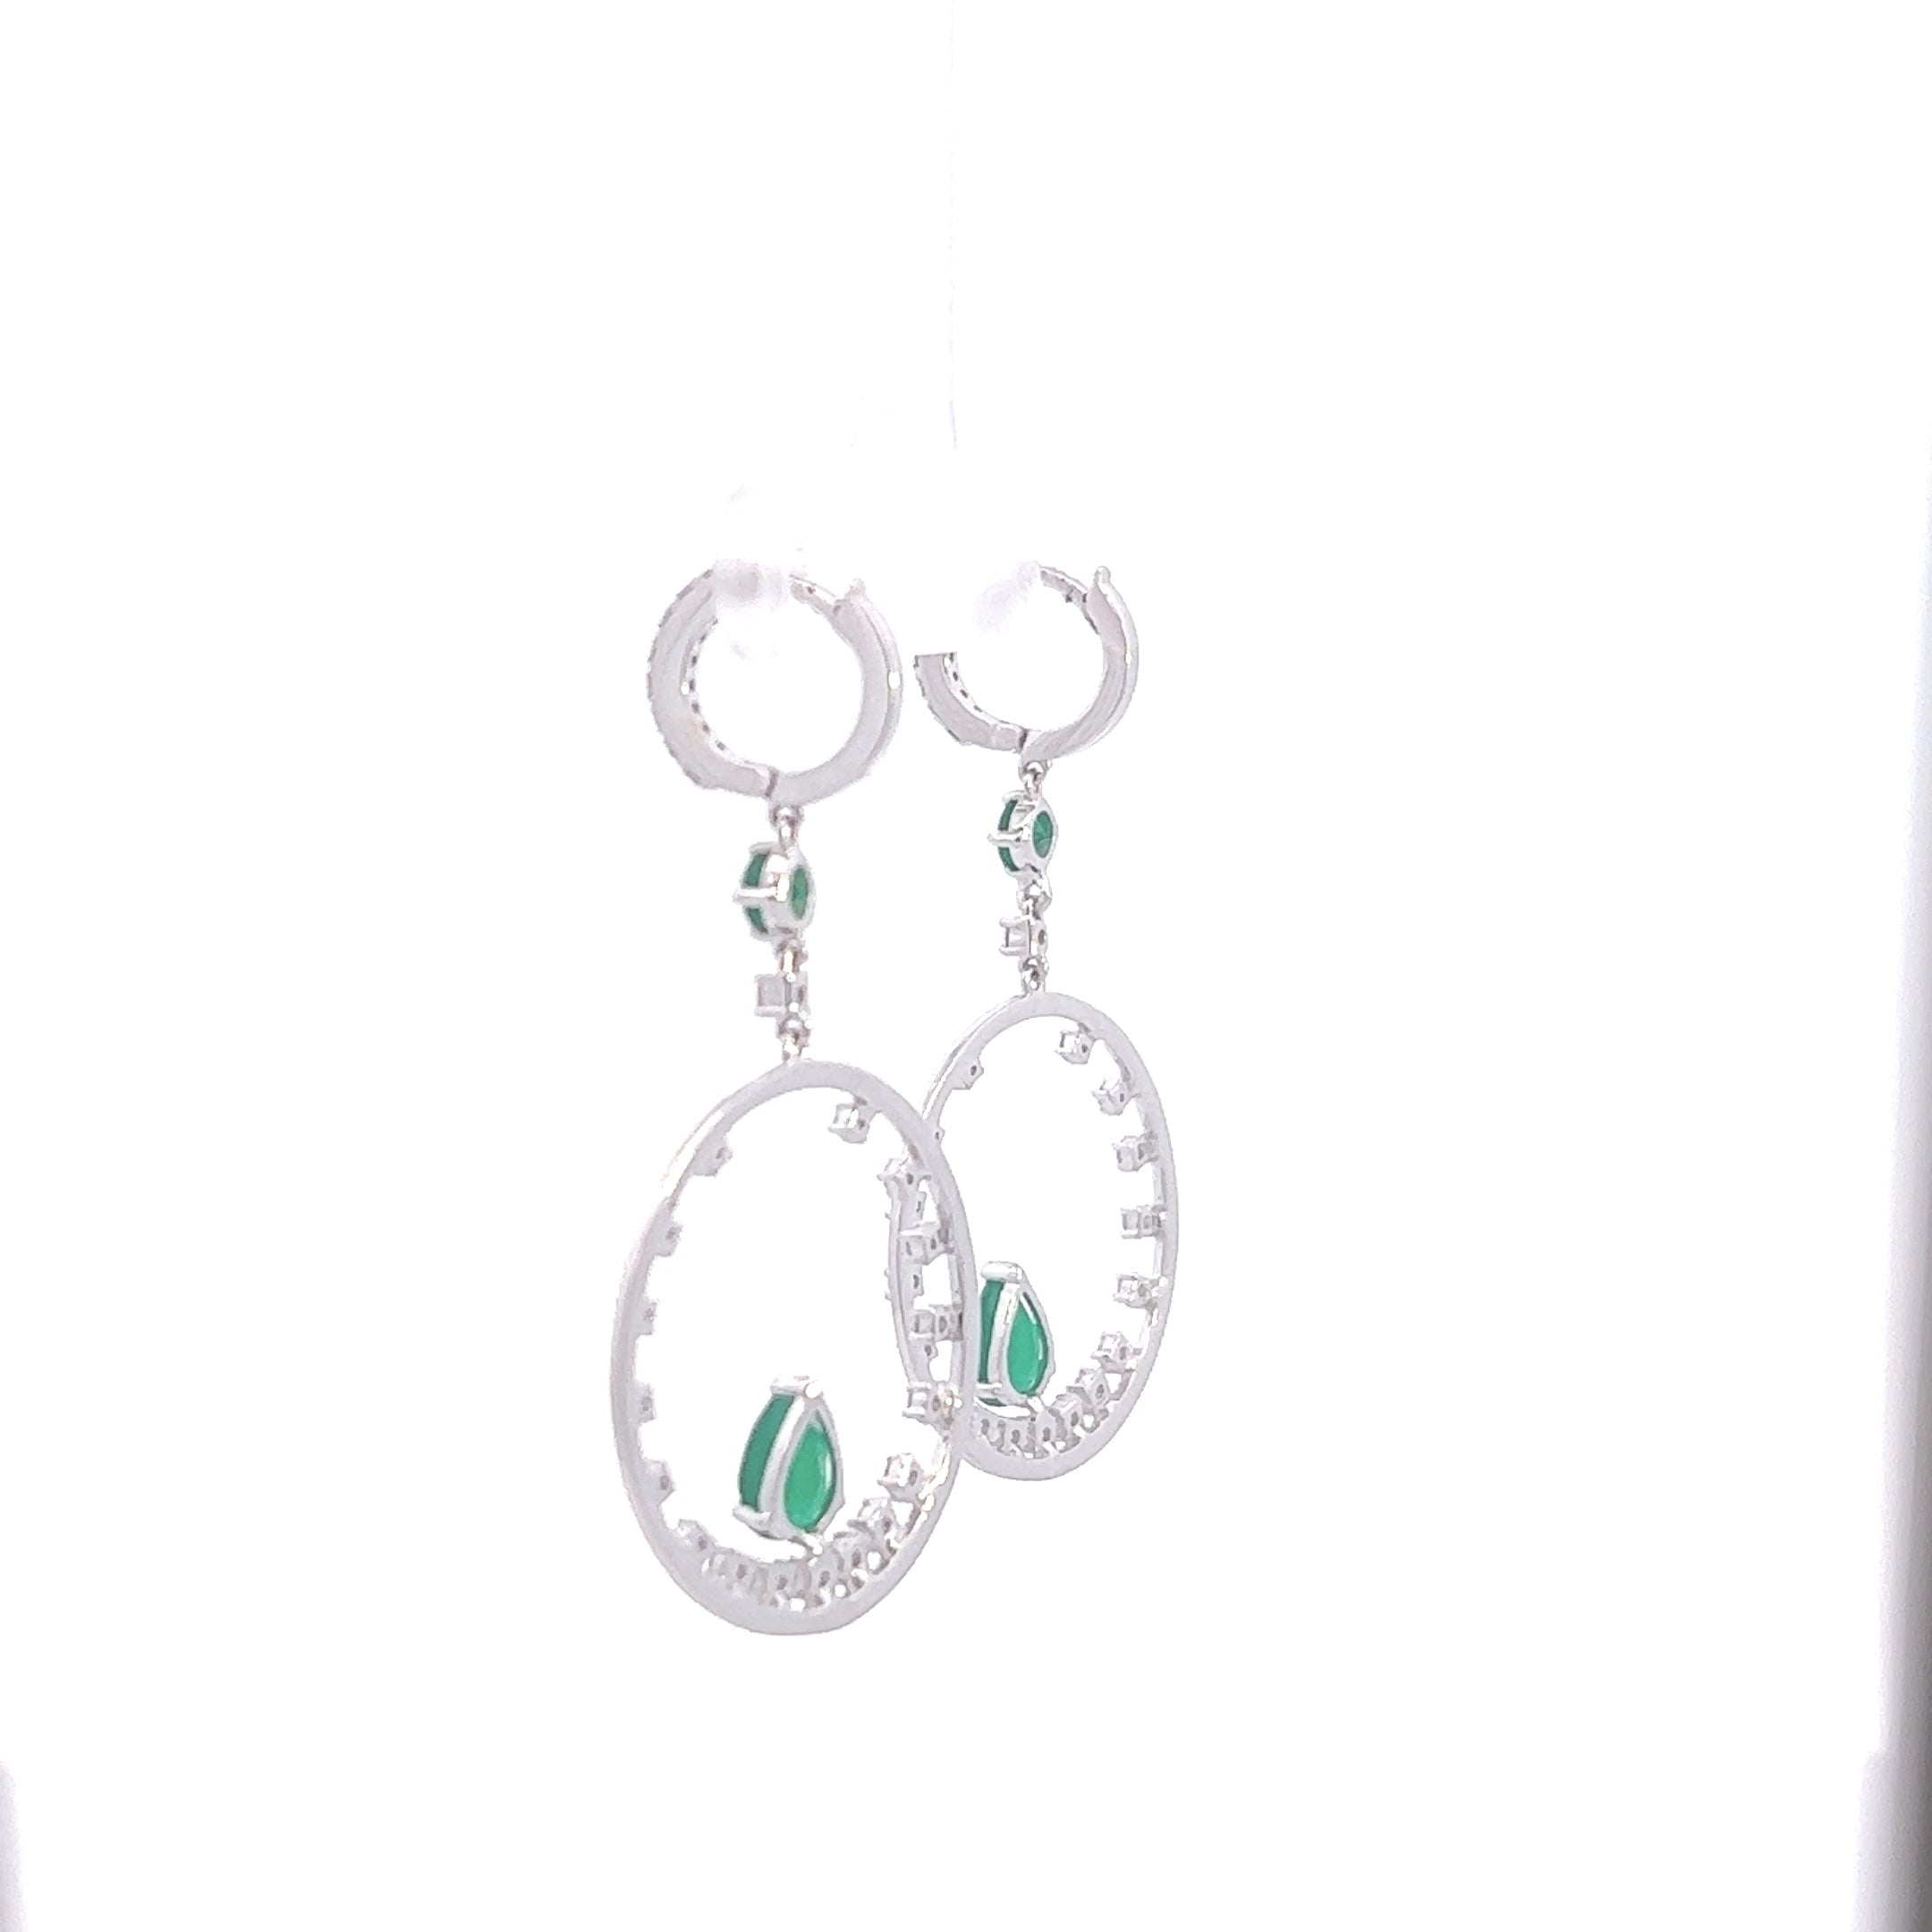 Attract Green Pear And Round  Cut Gemstone Diamond Gold Drop Earring